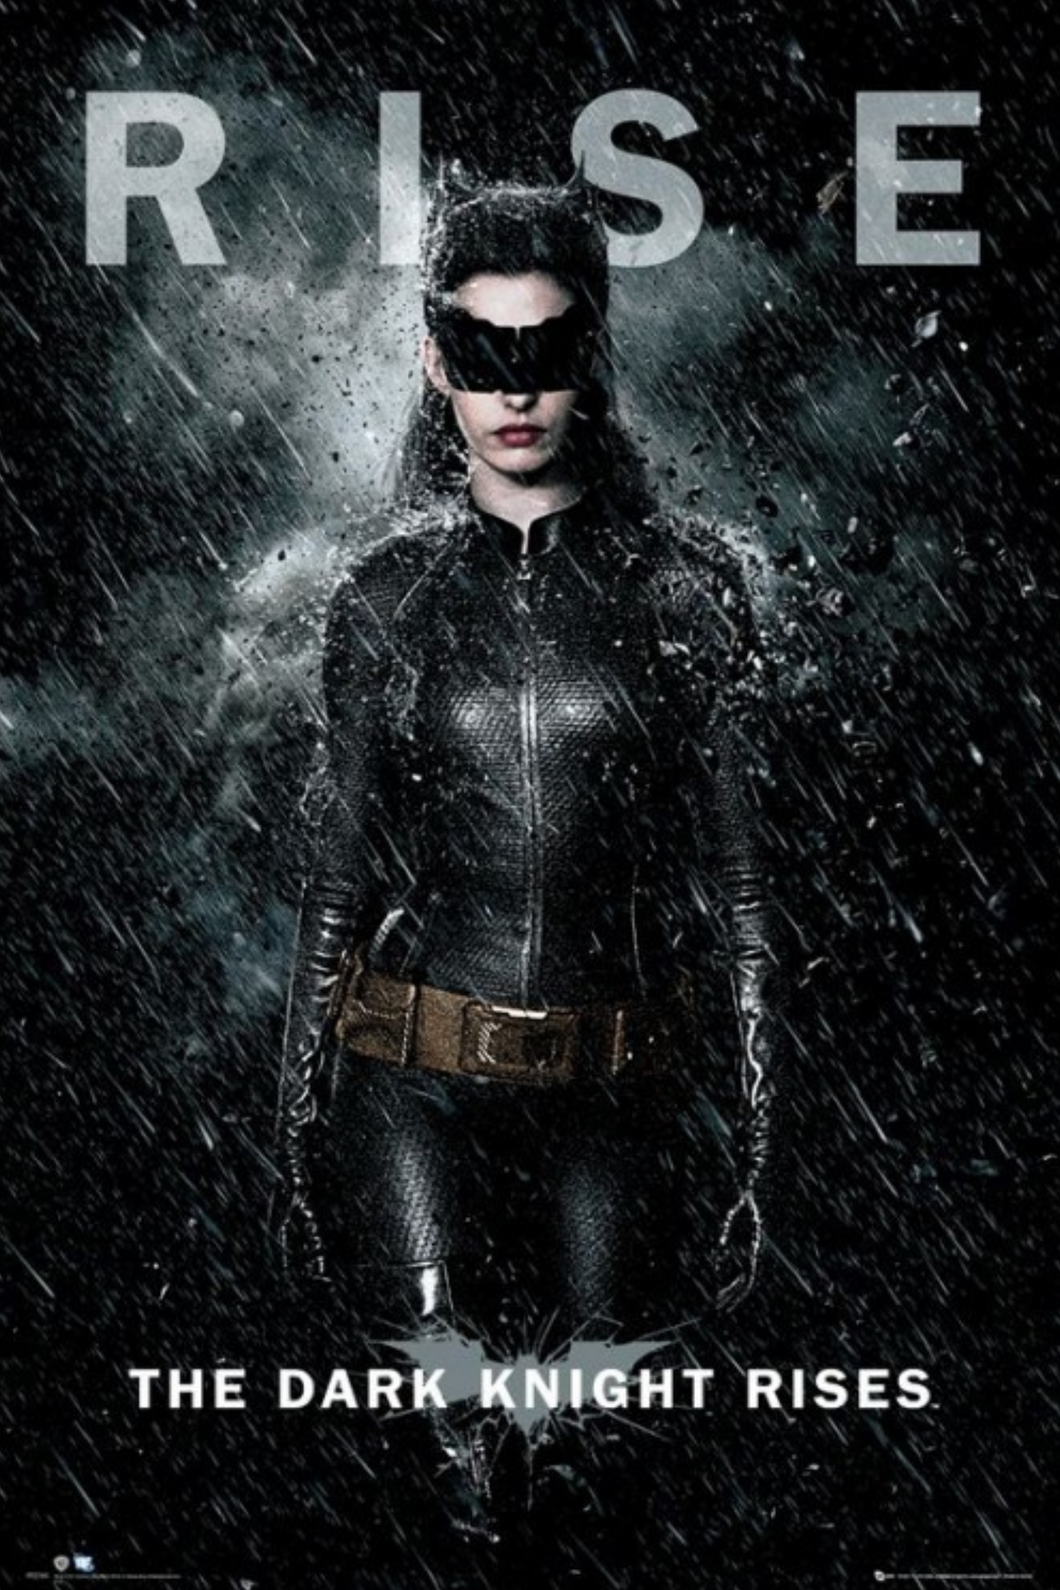 The Dark Knight Rises - Catwoman Poster